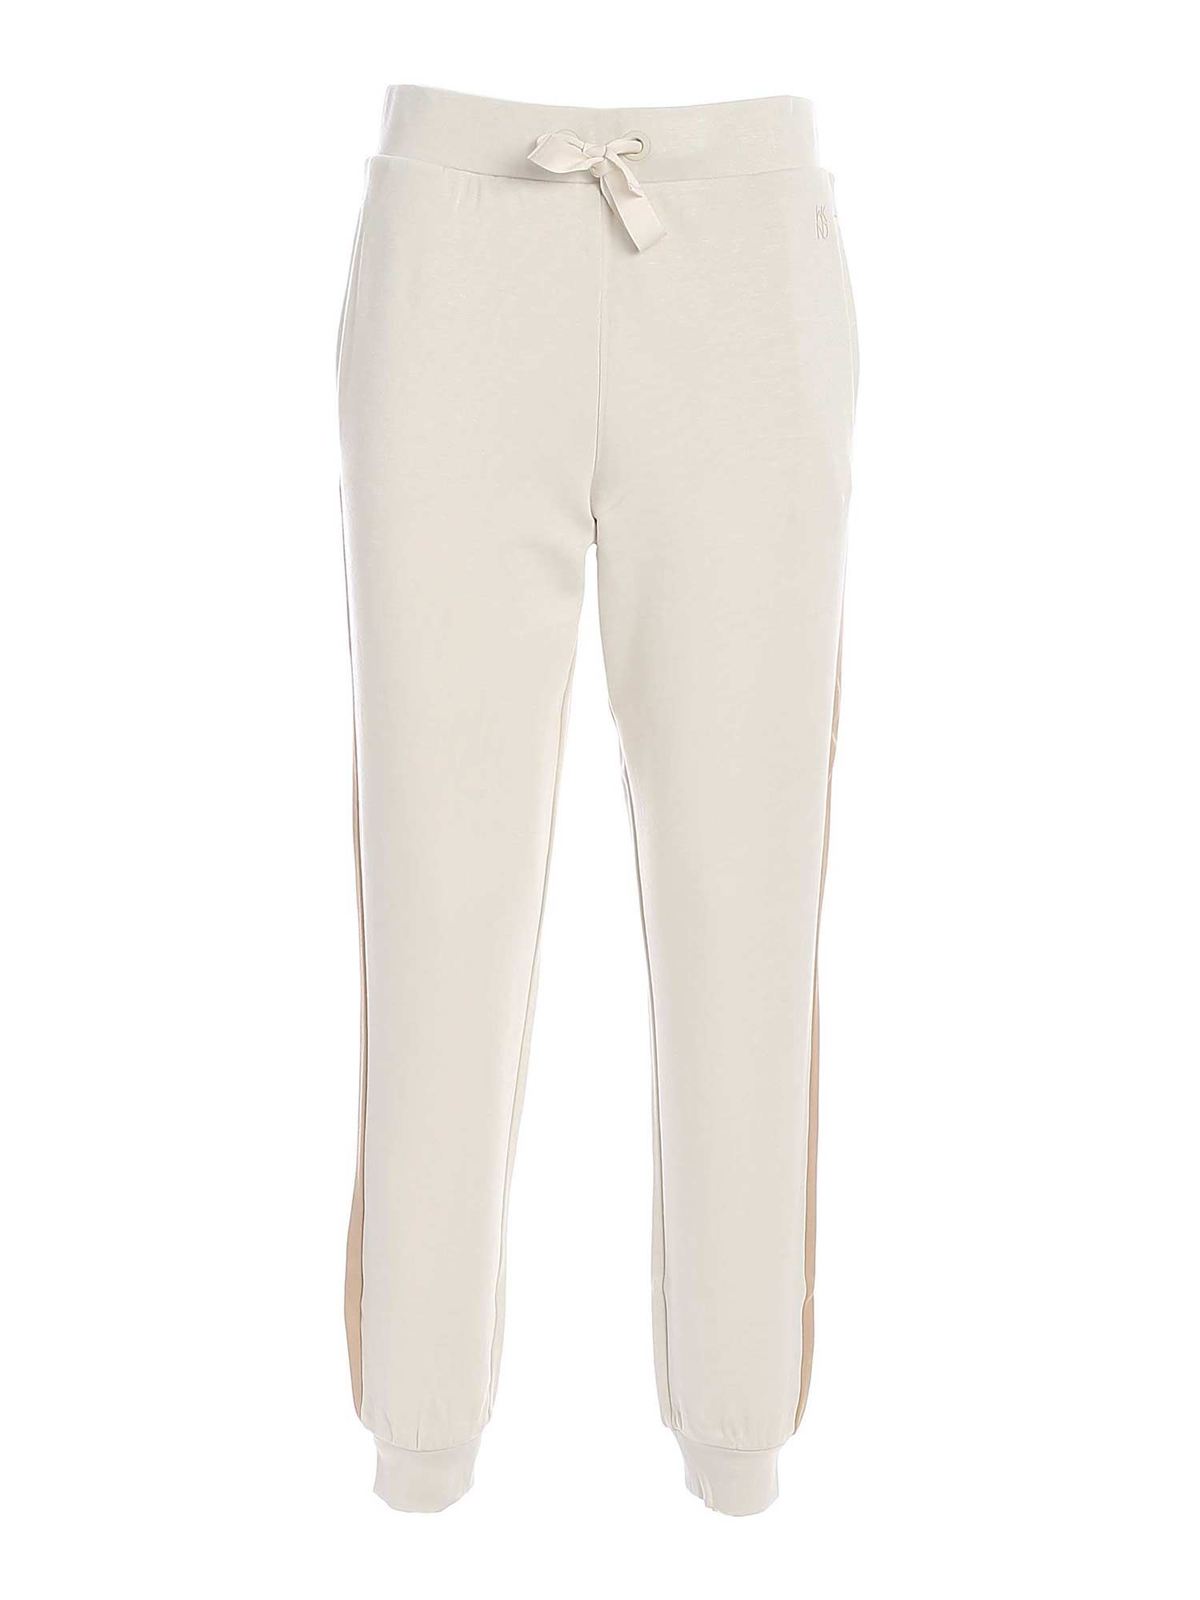 Tracksuit bottoms Weekend Max Mara - Domino pants in ivory color ...